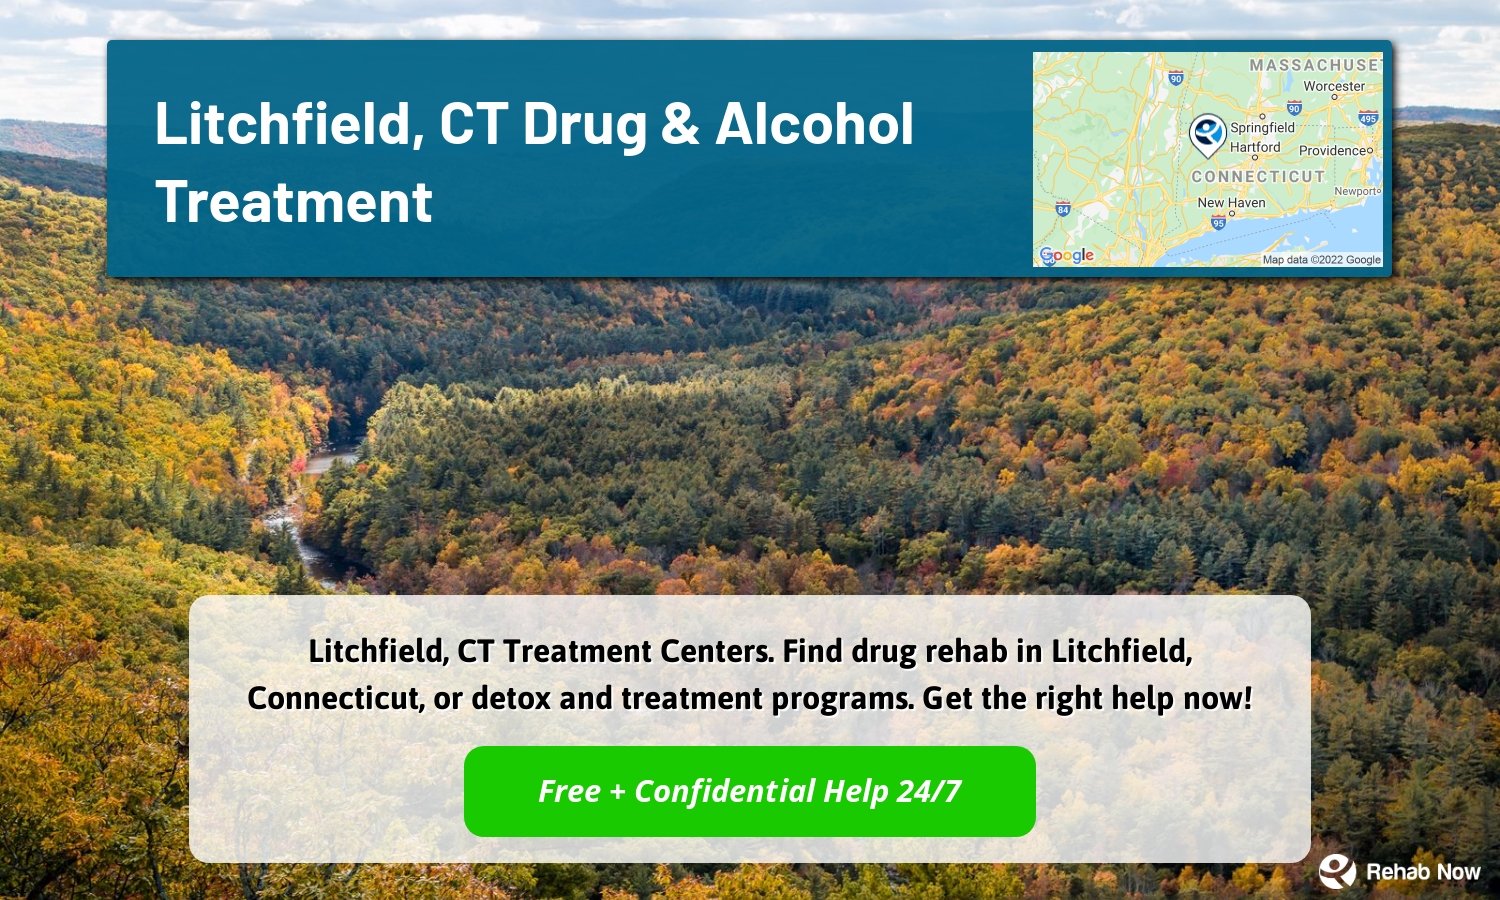 Litchfield, CT Treatment Centers. Find drug rehab in Litchfield, Connecticut, or detox and treatment programs. Get the right help now!